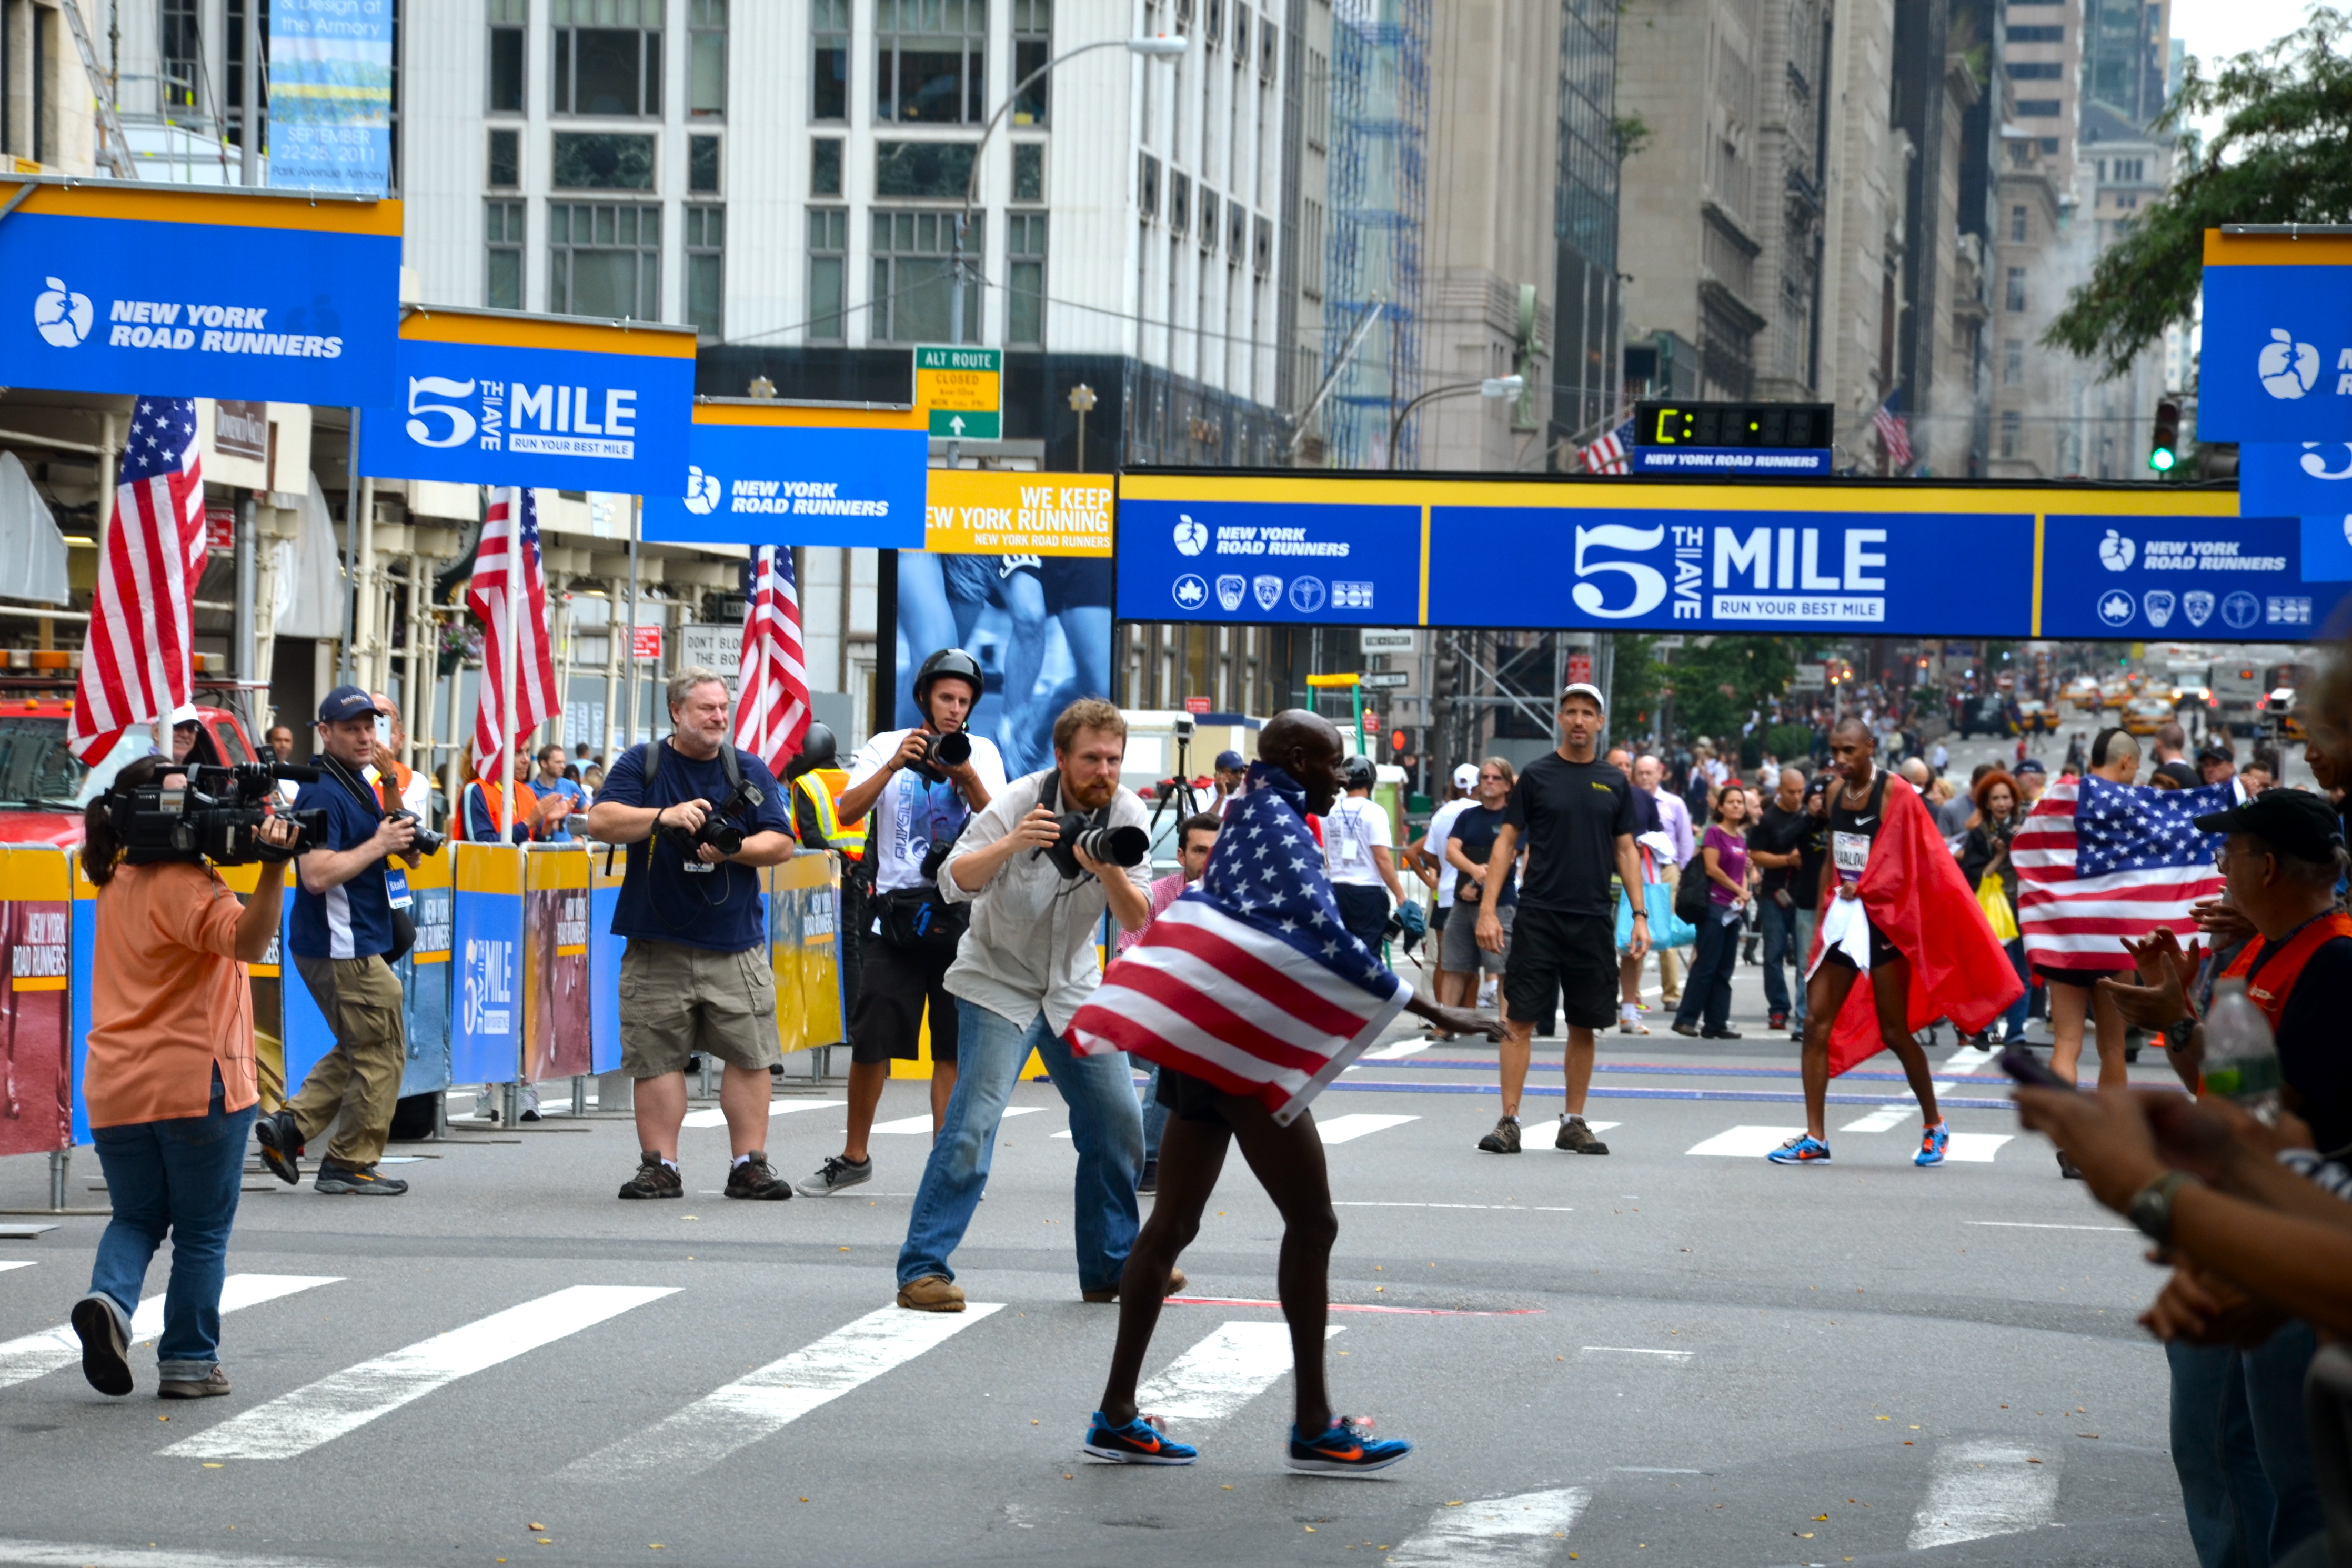 The Fifth Ave Mile Finish